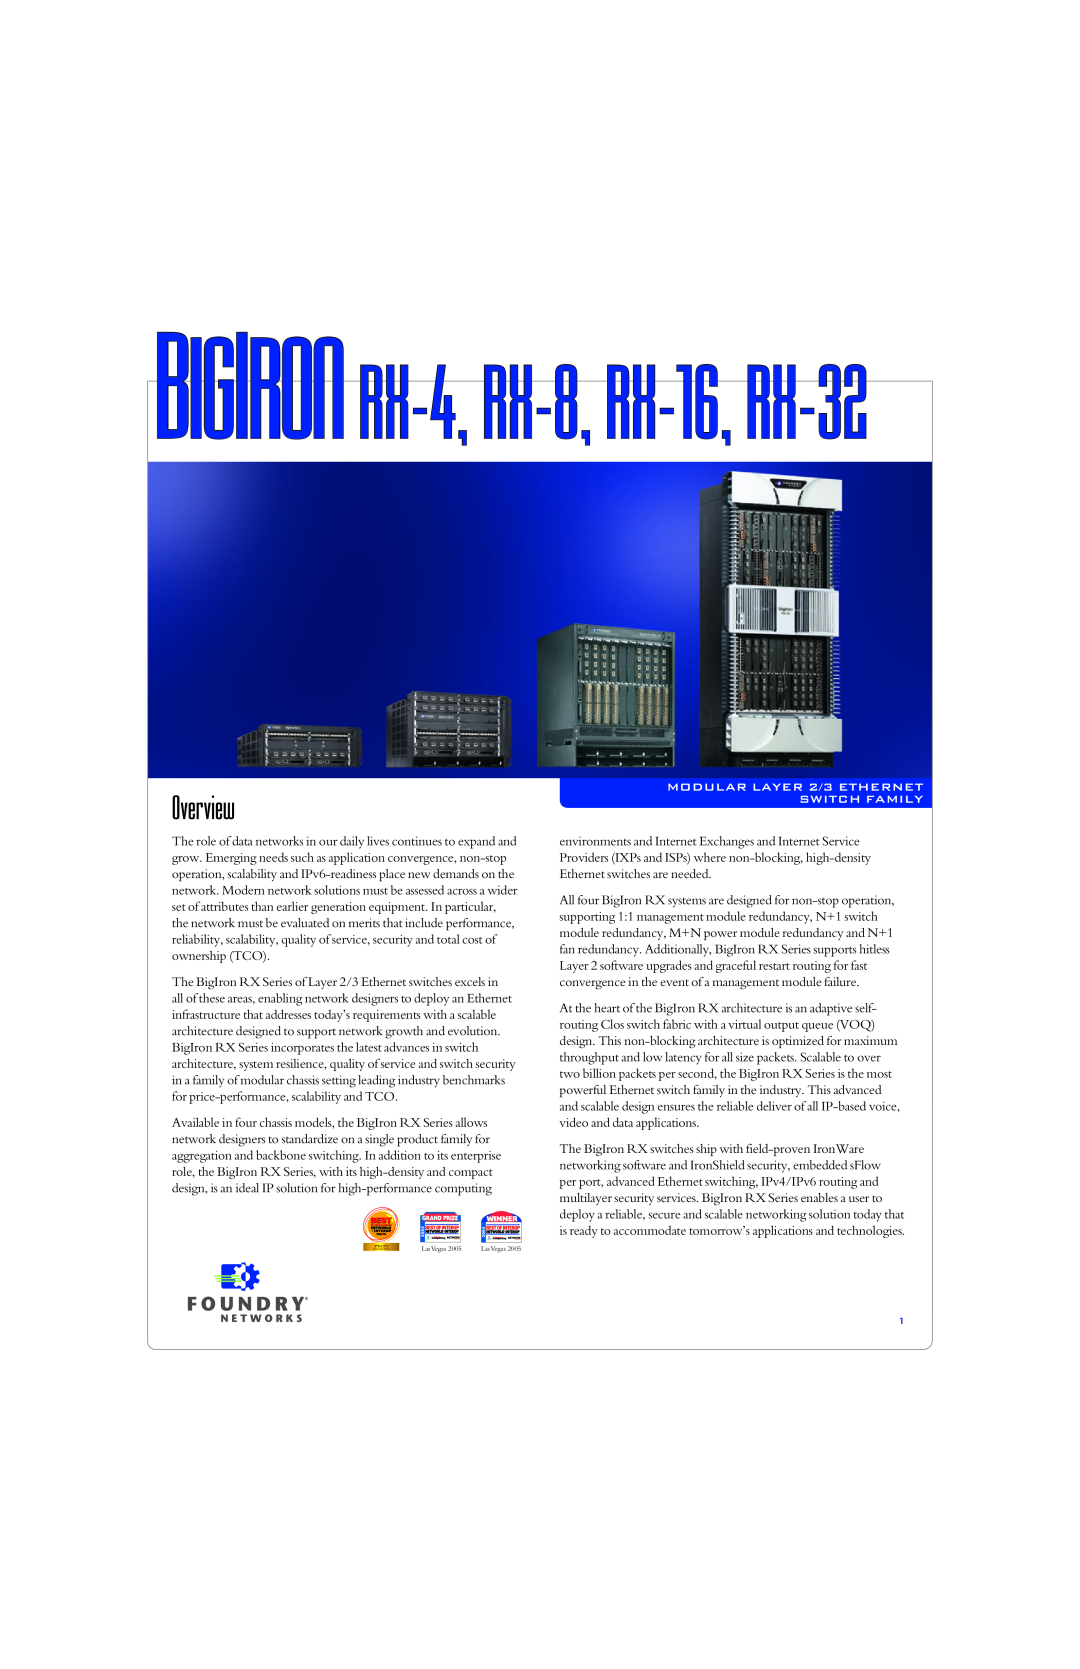 Foundry Networks RX-76 manual Overview, BIGIRON RX-4, RX-8, RX-16, RX-32, MODULAR LAYER 2/3 ETHERNET SWITCH FAMILY 